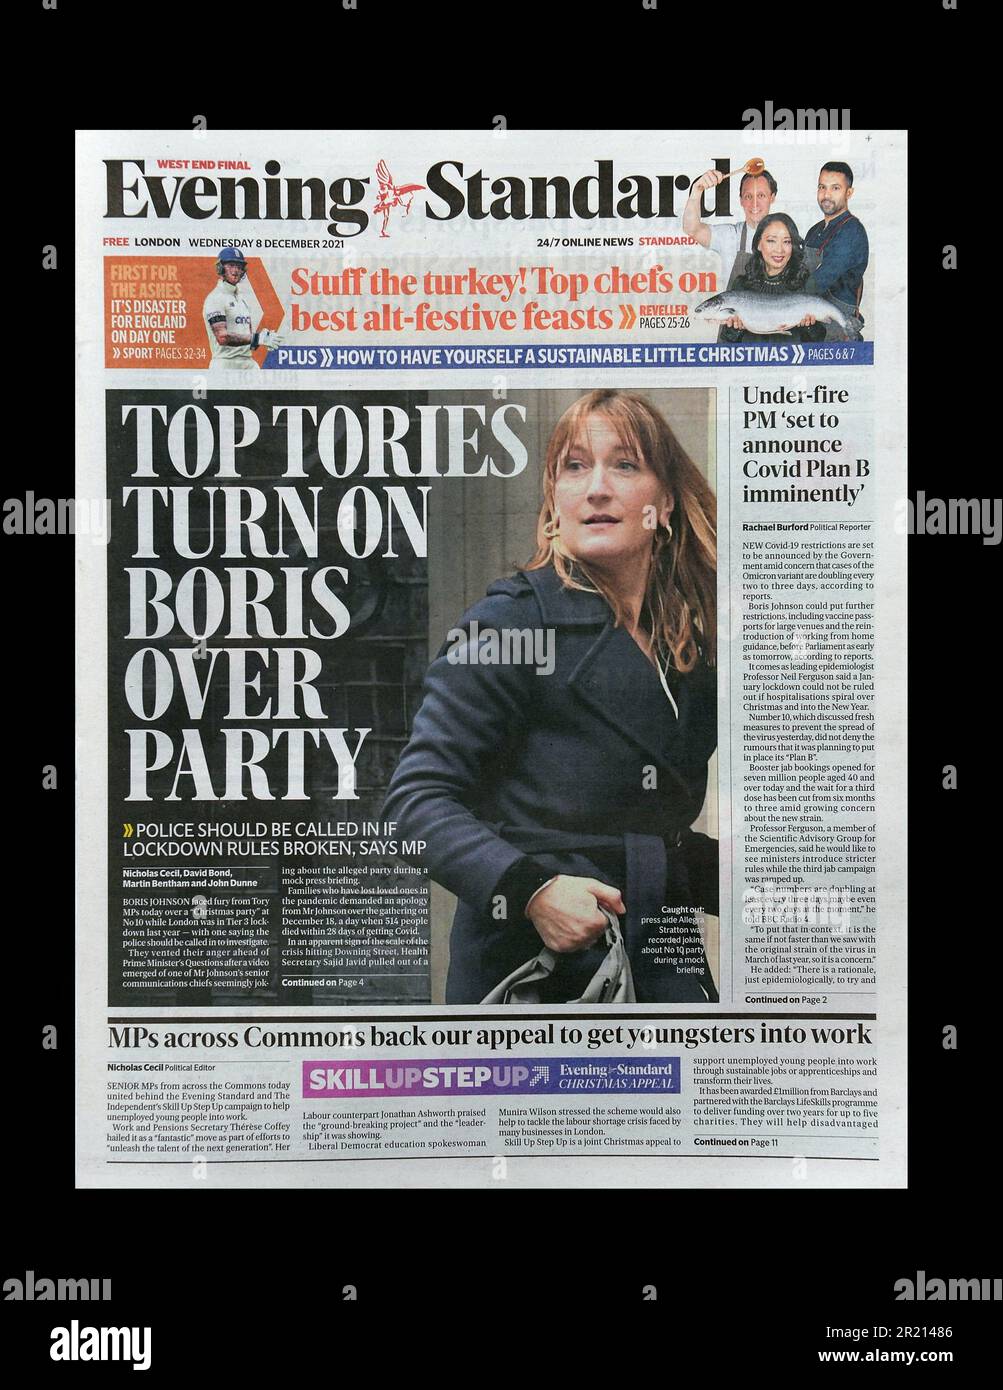 Front page London Evening Standard newspaper headline after the resignation of Allegra Stratton, former Downing Street Press Secretary under Boris Johnson from November 2020 to April 2021. In April 2021, Stratton was appointed as spokesperson for COP26 President Alok Sharma. She resigned from this post in December 2021 after footage was released of her at a December 2020 press conference rehearsal, in which she joked with colleagues about a Christmas party that secretly took place at 10 Downing Street while the country was in a COVID-19 lockdown. Stock Photo